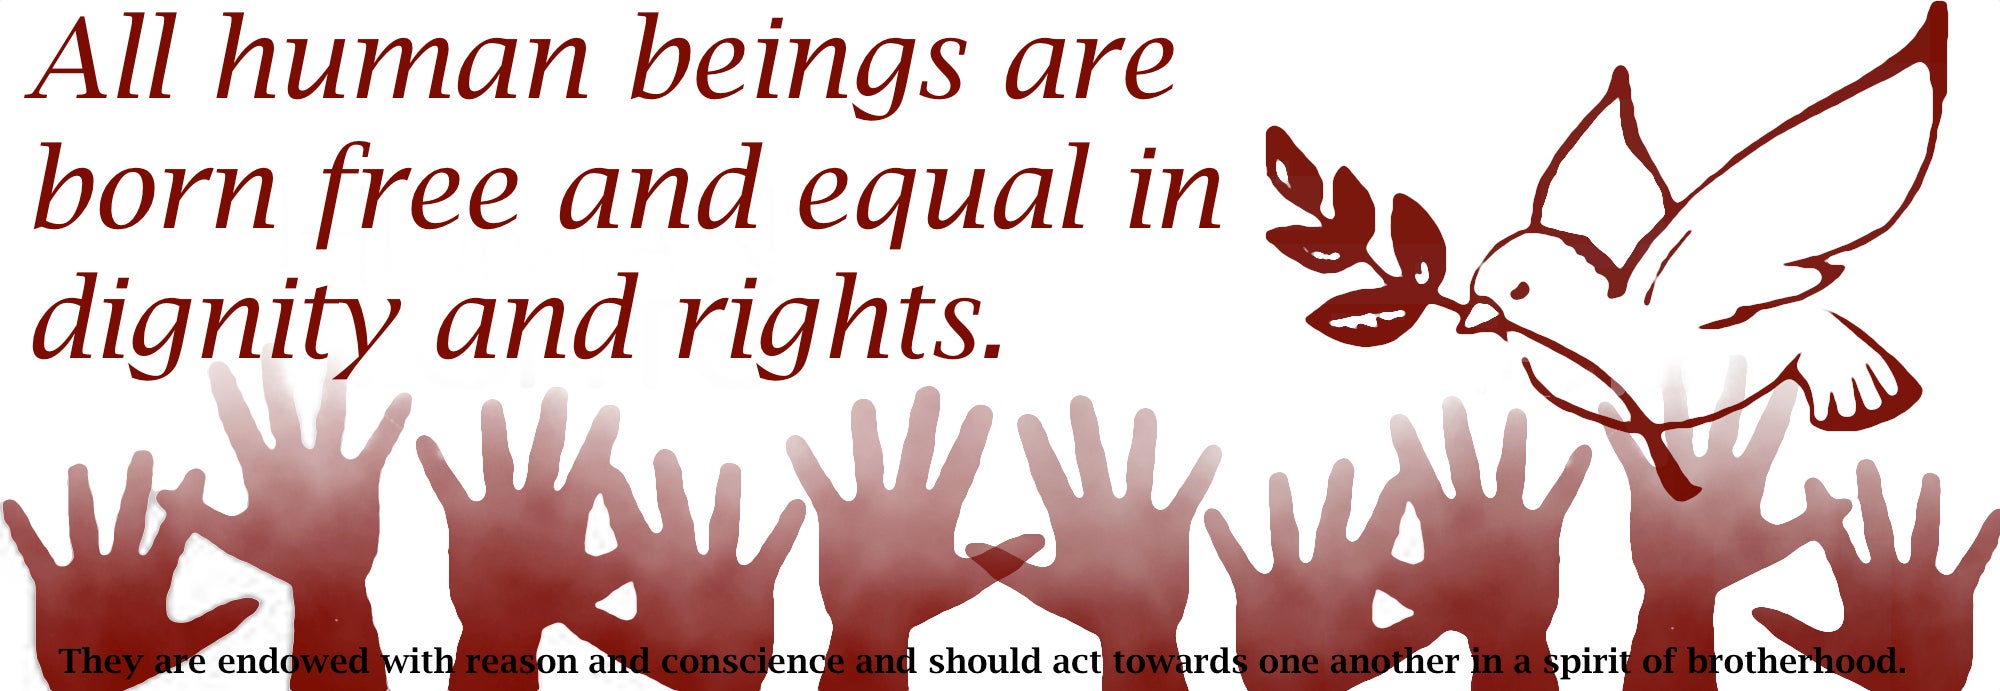 Human rights poster